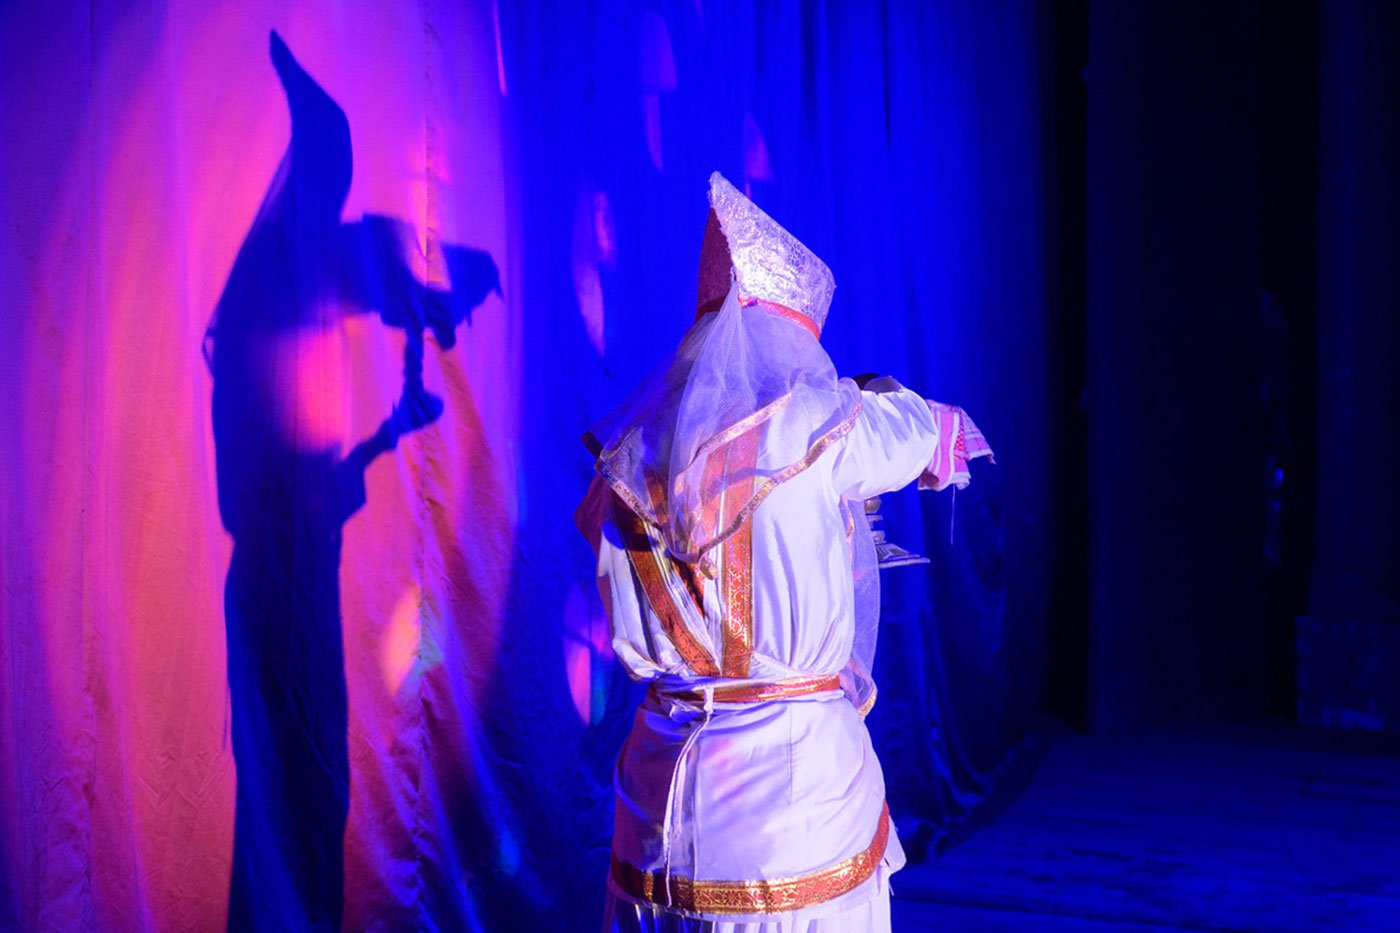 Riki holds up a xorai as he exits the stage after his performance